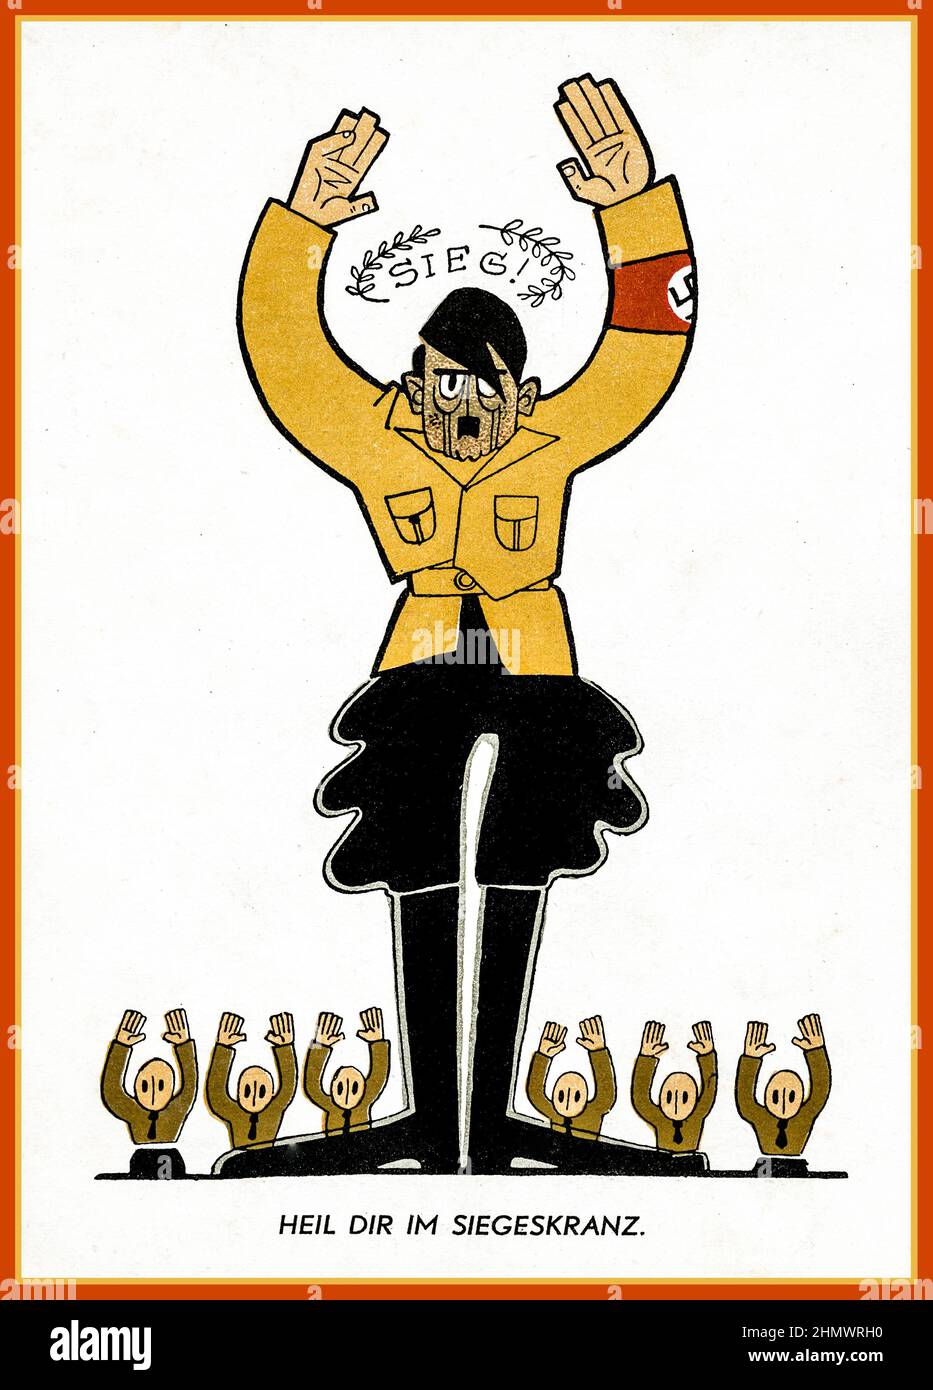 Vintage 1930s anti Nazi propaganda cartoon caricature of Adolf Hitler in Sturmabteilung uniform with the headline 'SIEG' 'Victory'  Heil dir im siegeskranz, 'Hail to you in the wreath of victory' Adolf Hitler and collegues have their hands up in surrender Stock Photo